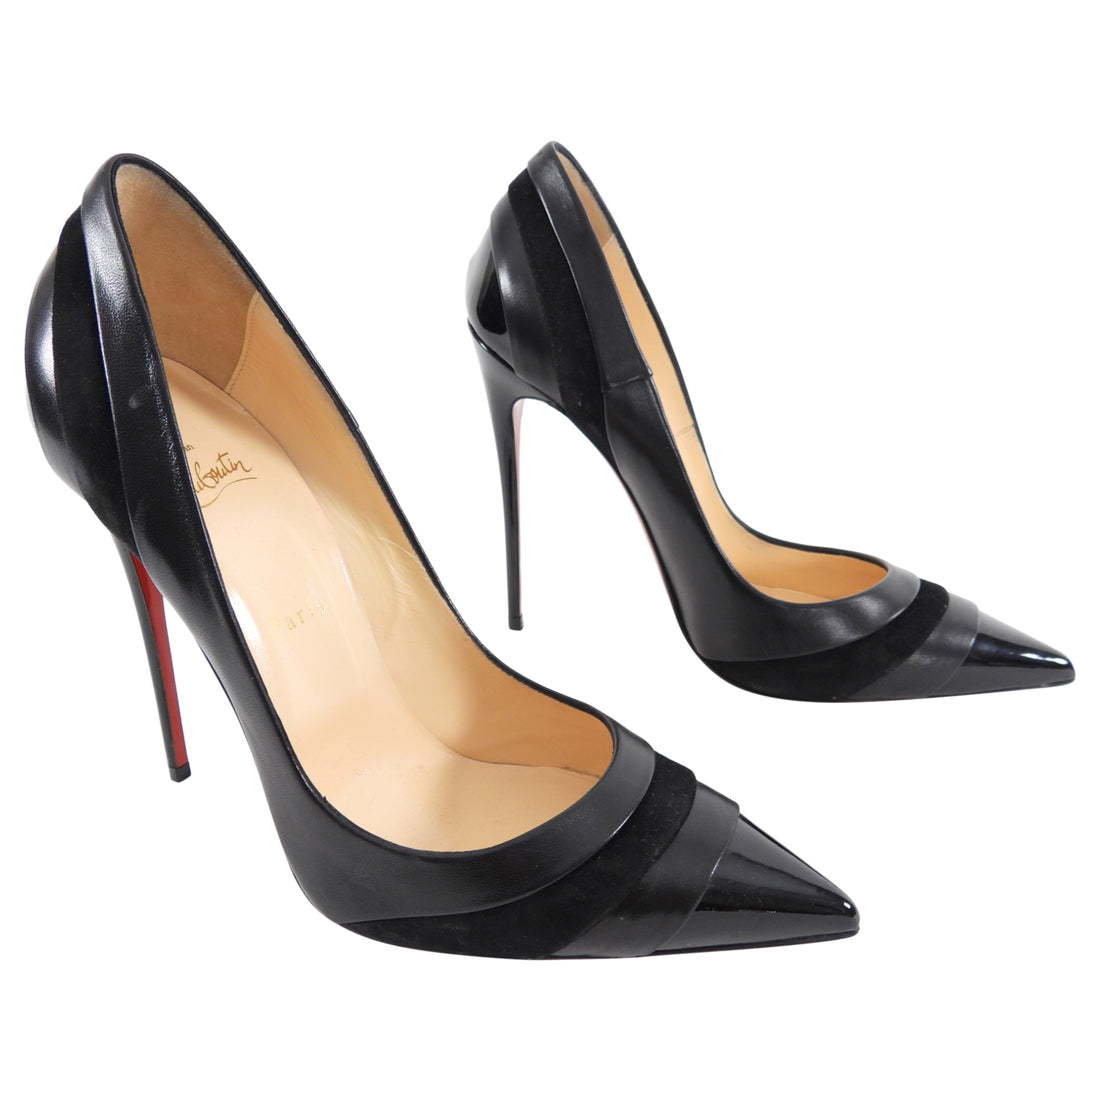 Christian Louboutin Archives - High heels daily